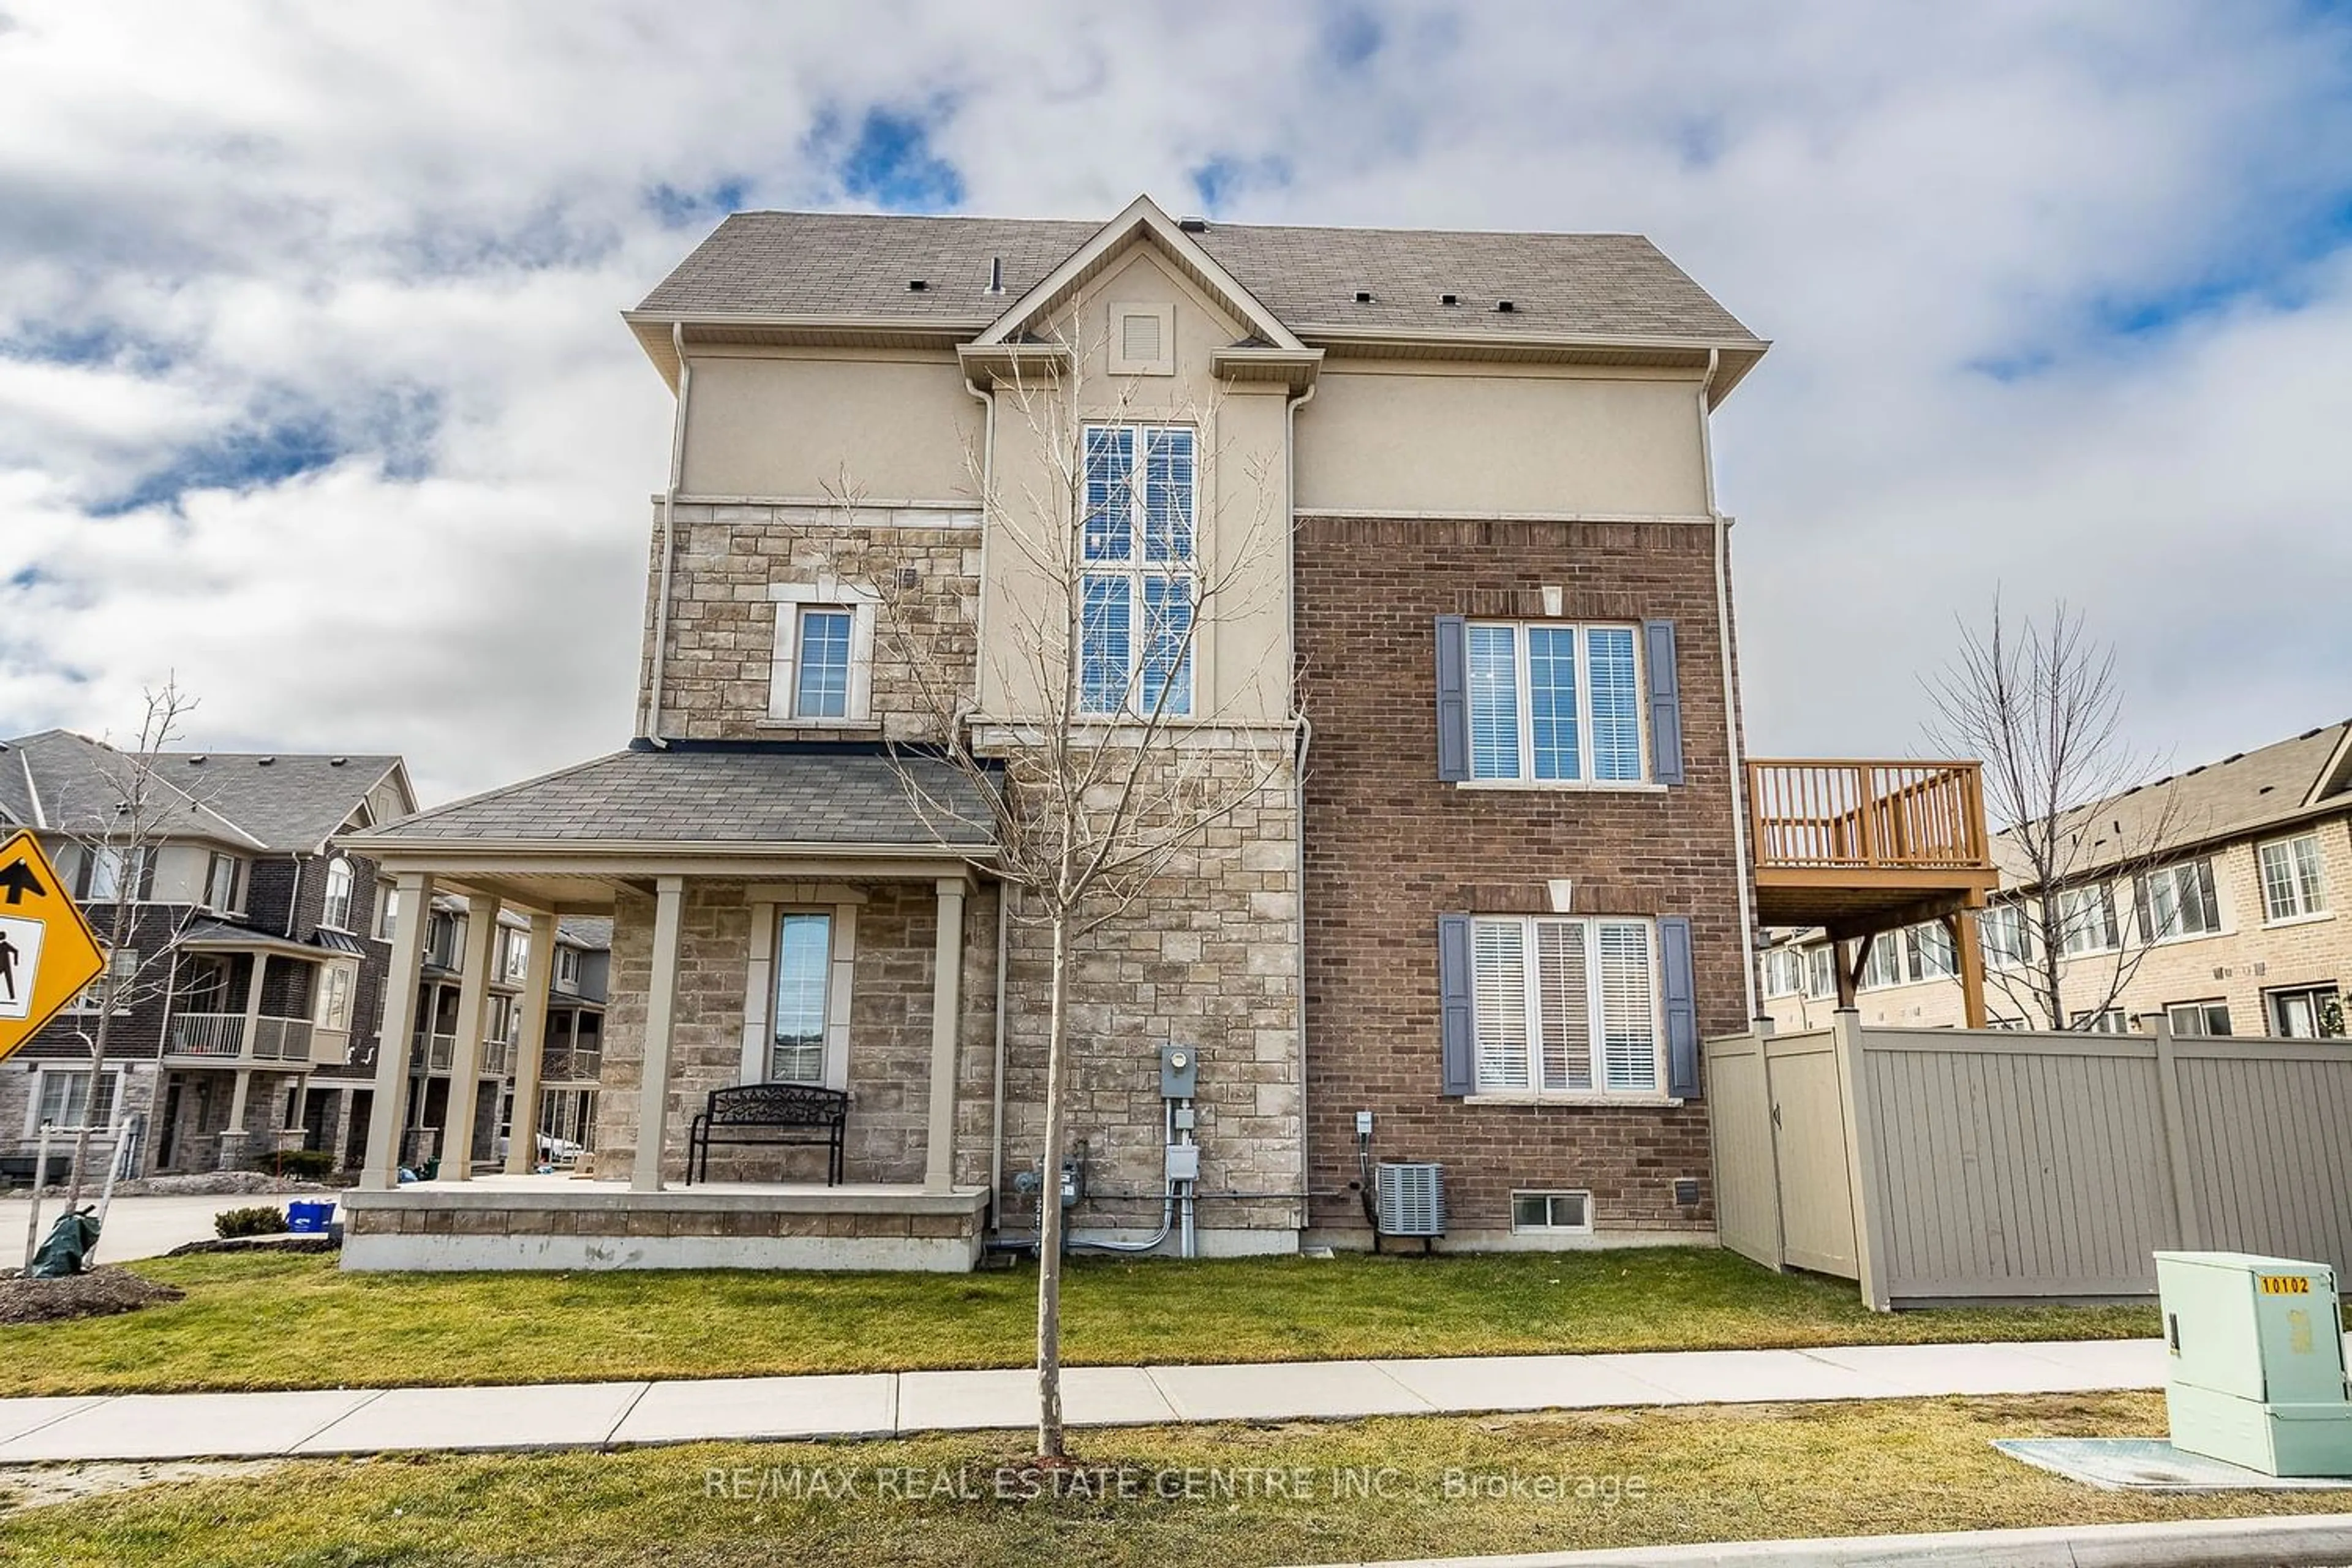 Home with brick exterior material for 411 Hardwick Common, Oakville Ontario L6H 0P6